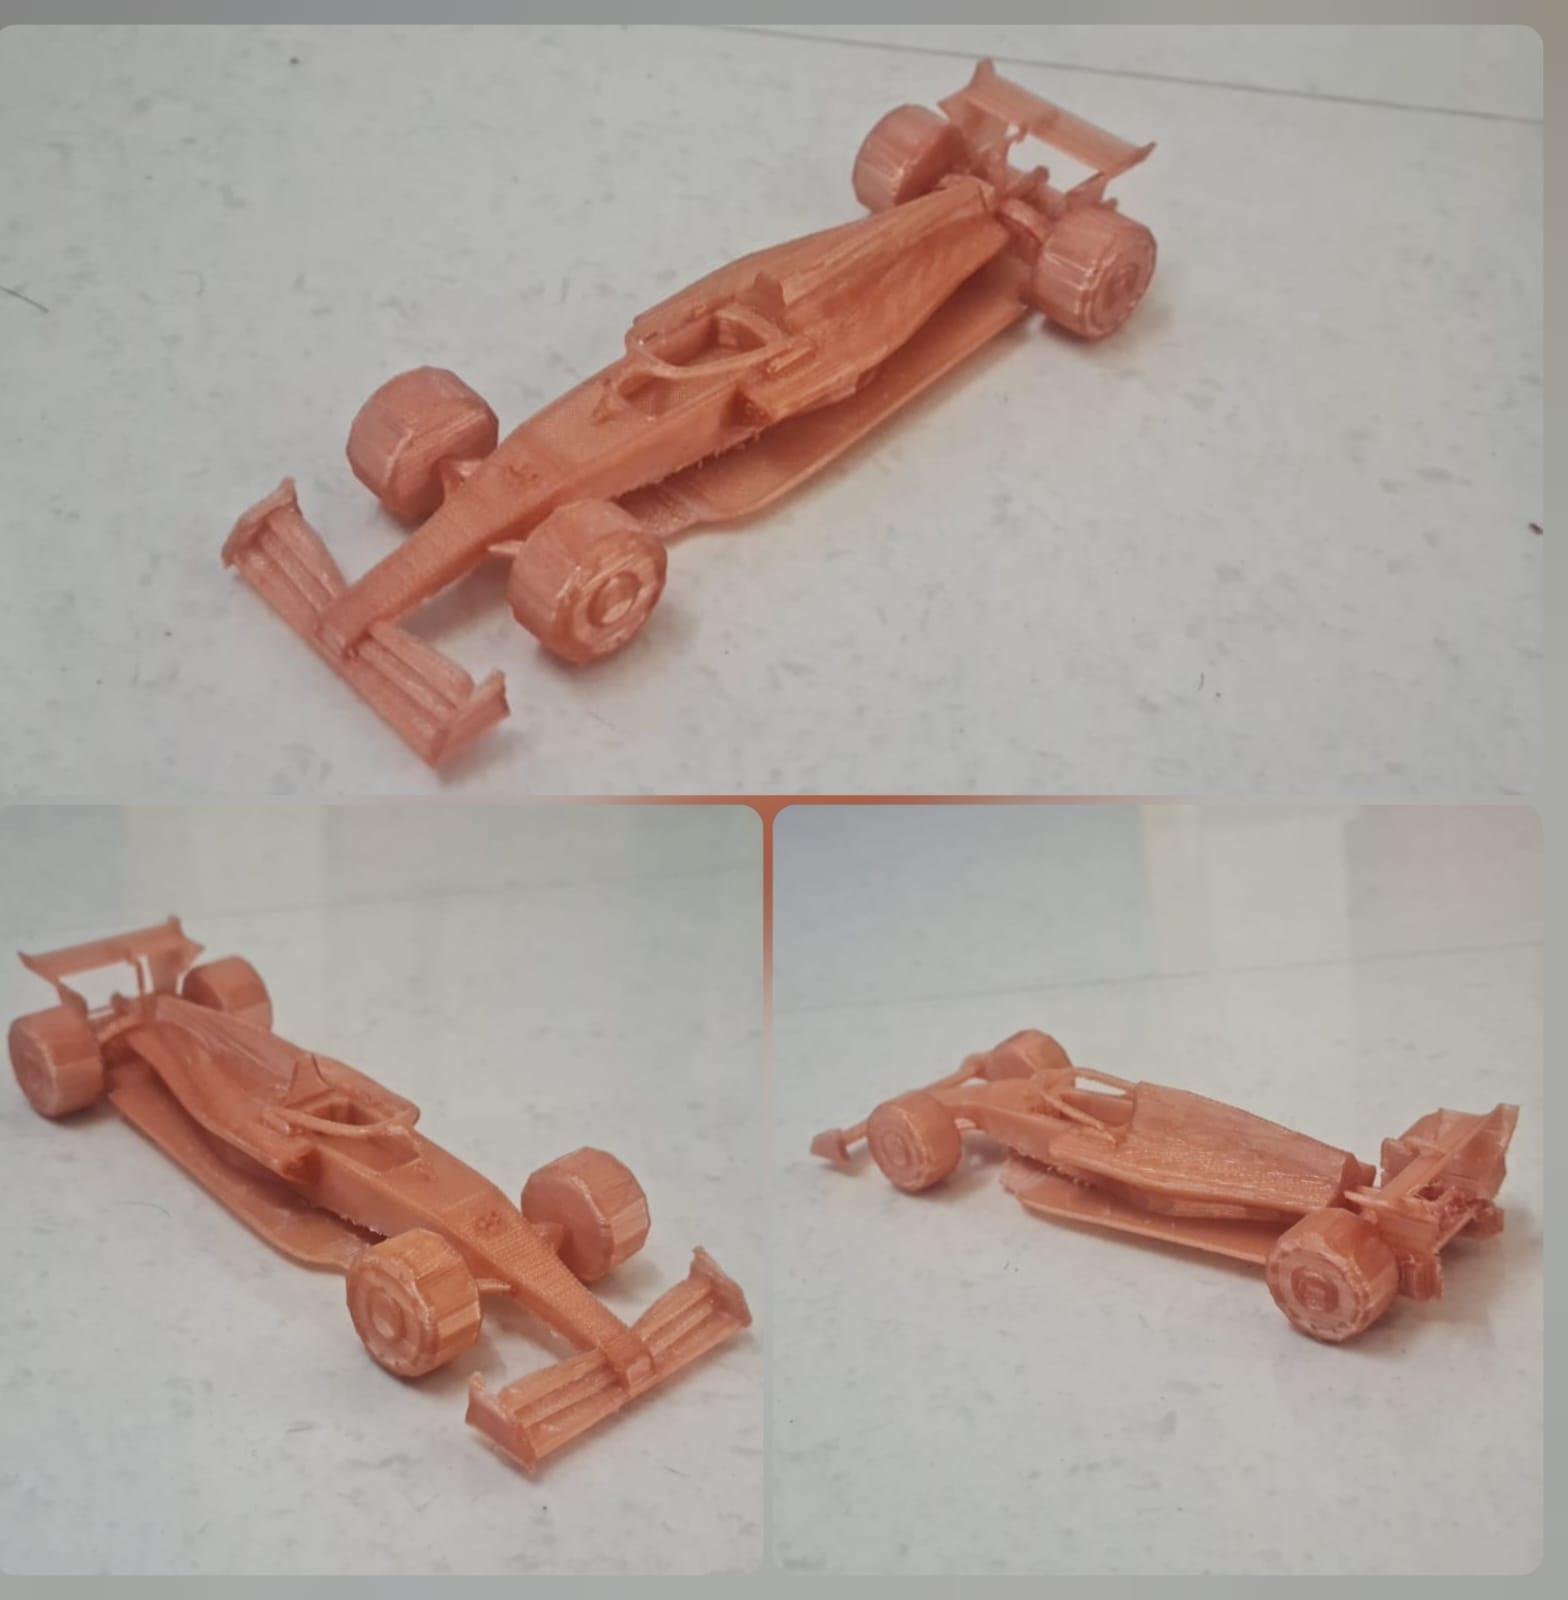 A F1 Car (Formula One) Model in Autodesk Fusion 360 for 3D Printing, Published As an STL File.